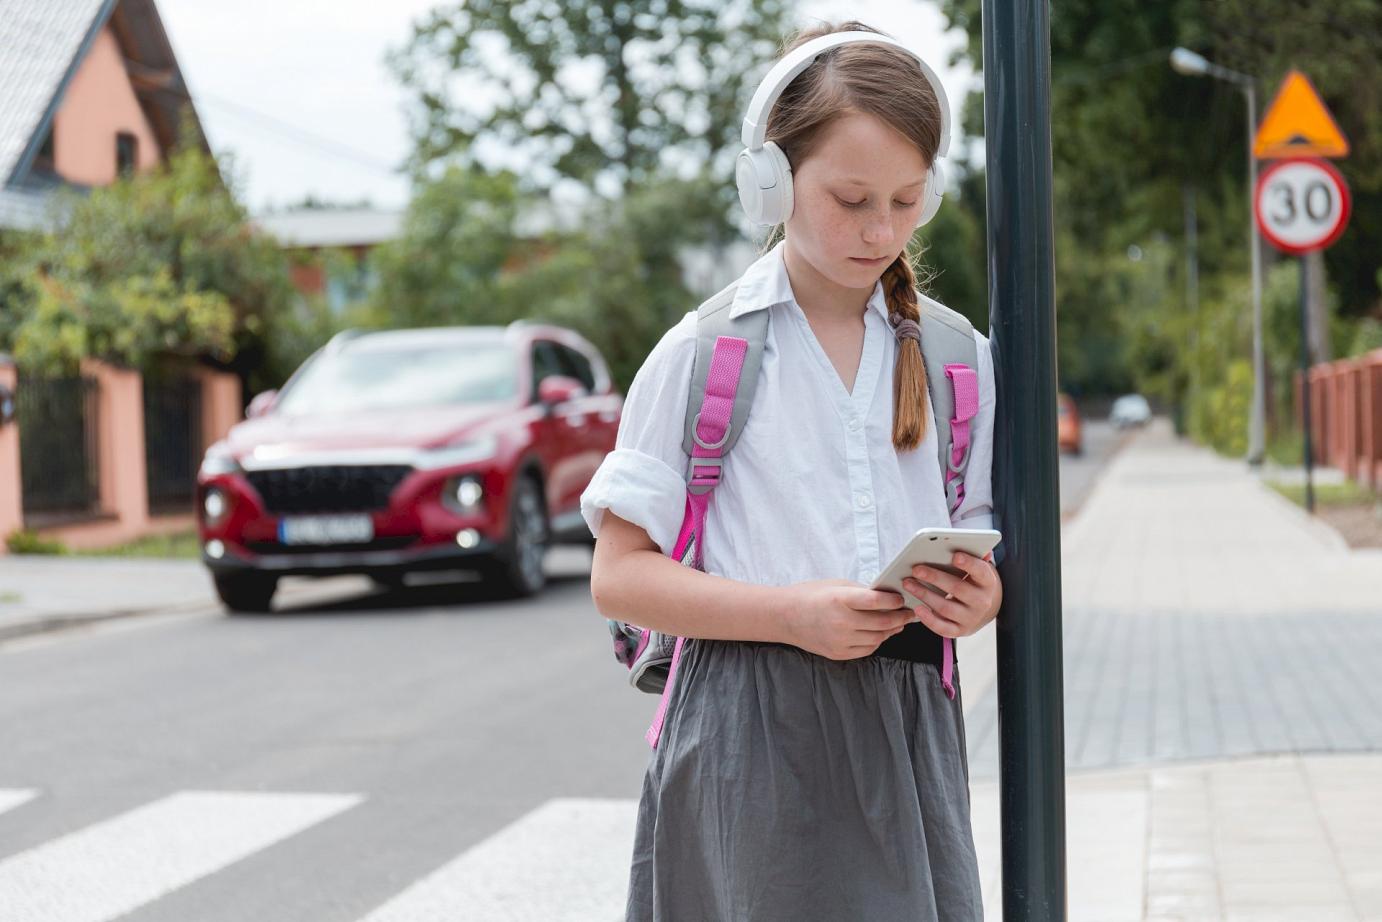 School Transportation: How to Keep Your Child Safe